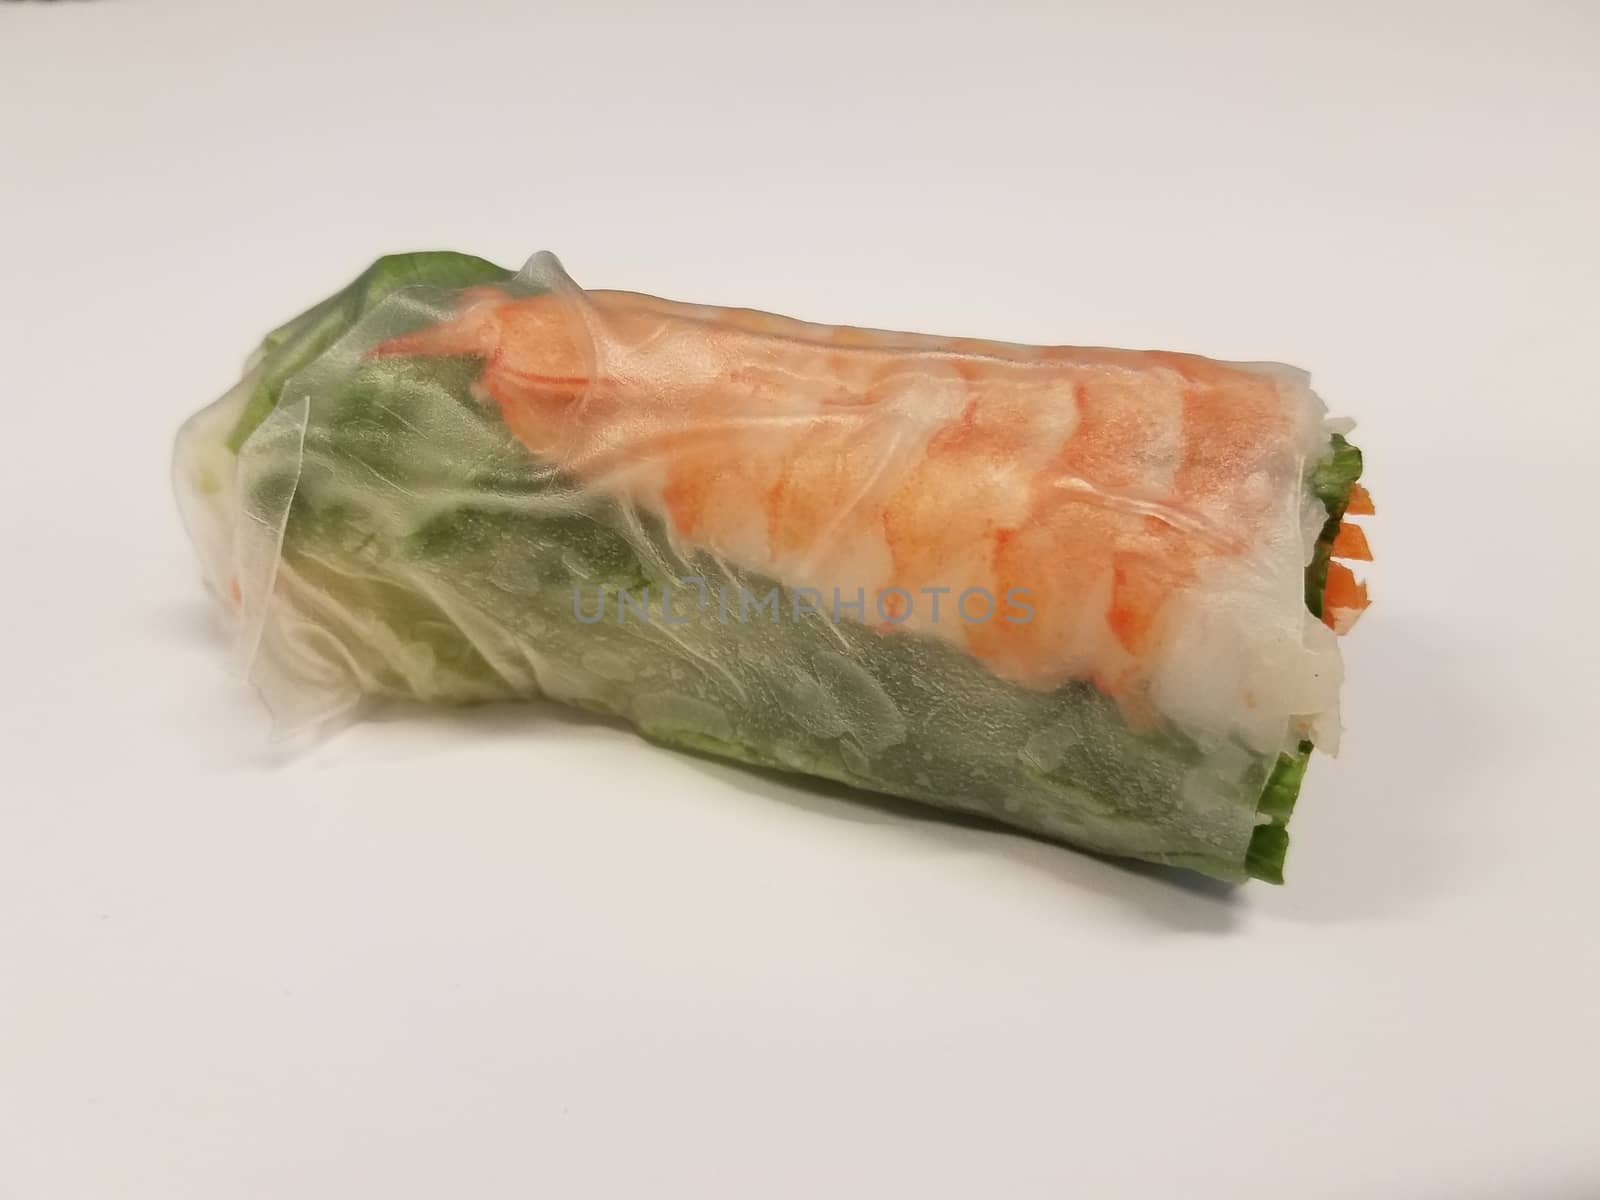 shrimp and lettuce and carrot rice paper roll on white desk or table